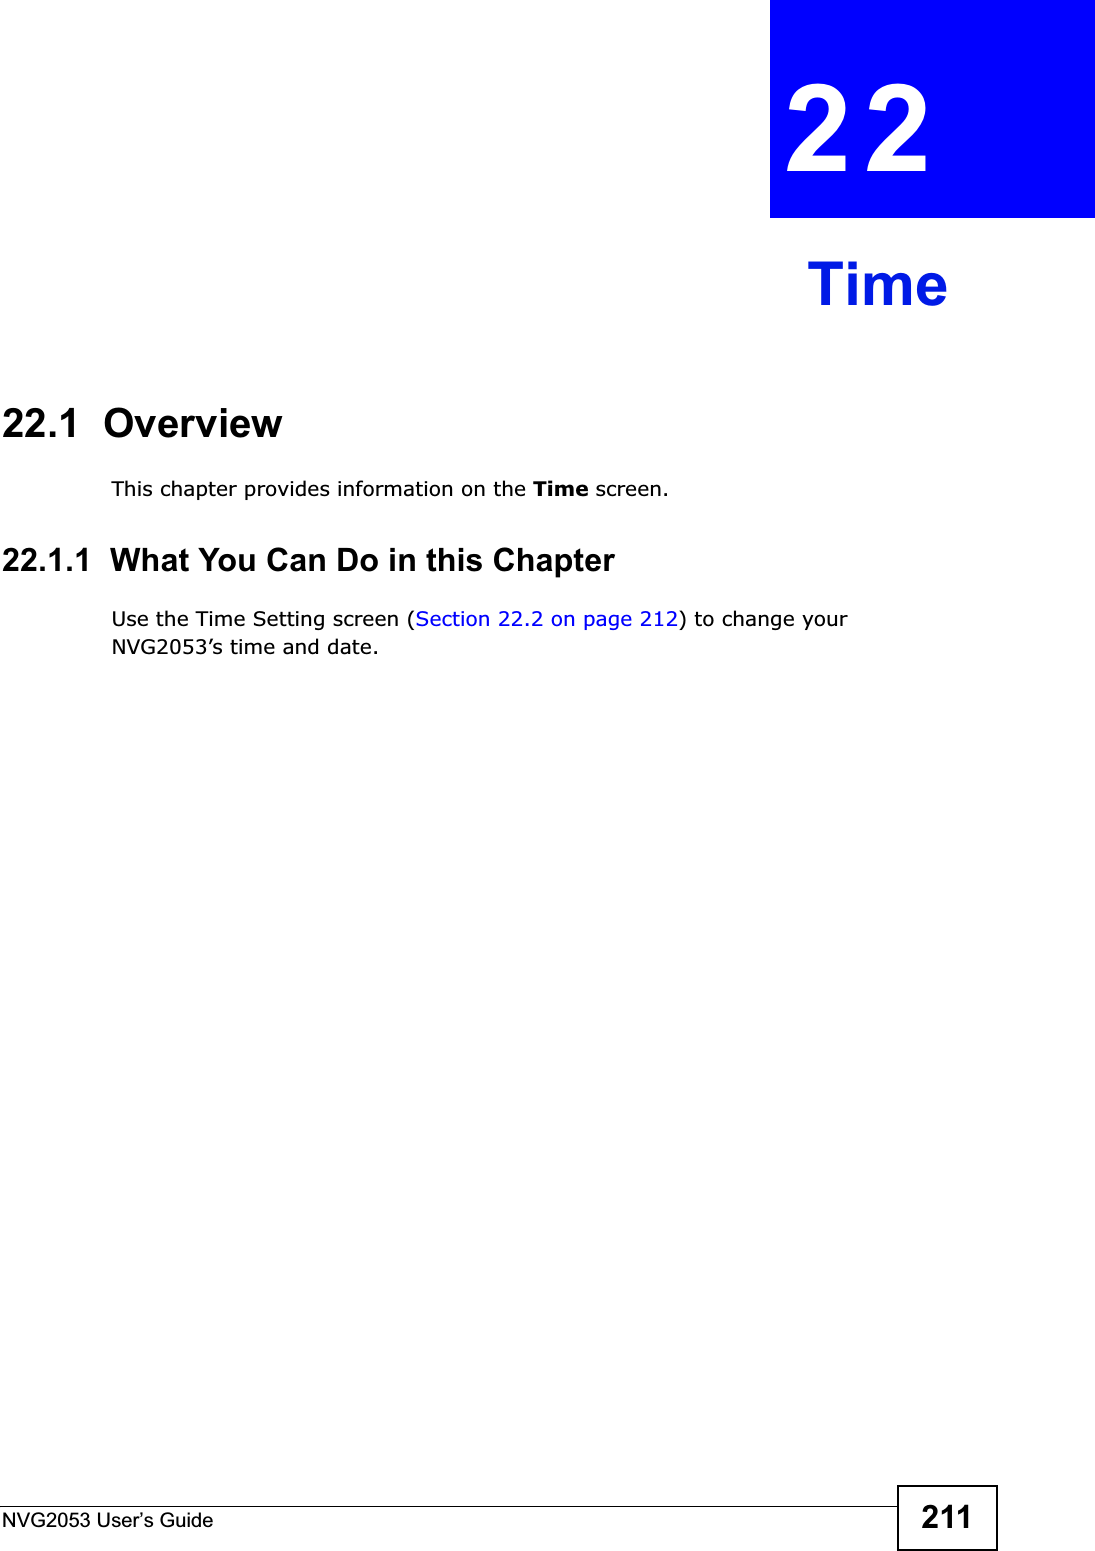 NVG2053 User’s Guide 211CHAPTER 22Time22.1  OverviewThis chapter provides information on the Time screen.22.1.1  What You Can Do in this ChapterUse the Time Setting screen (Section 22.2 on page 212) to change your NVG2053’s time and date.